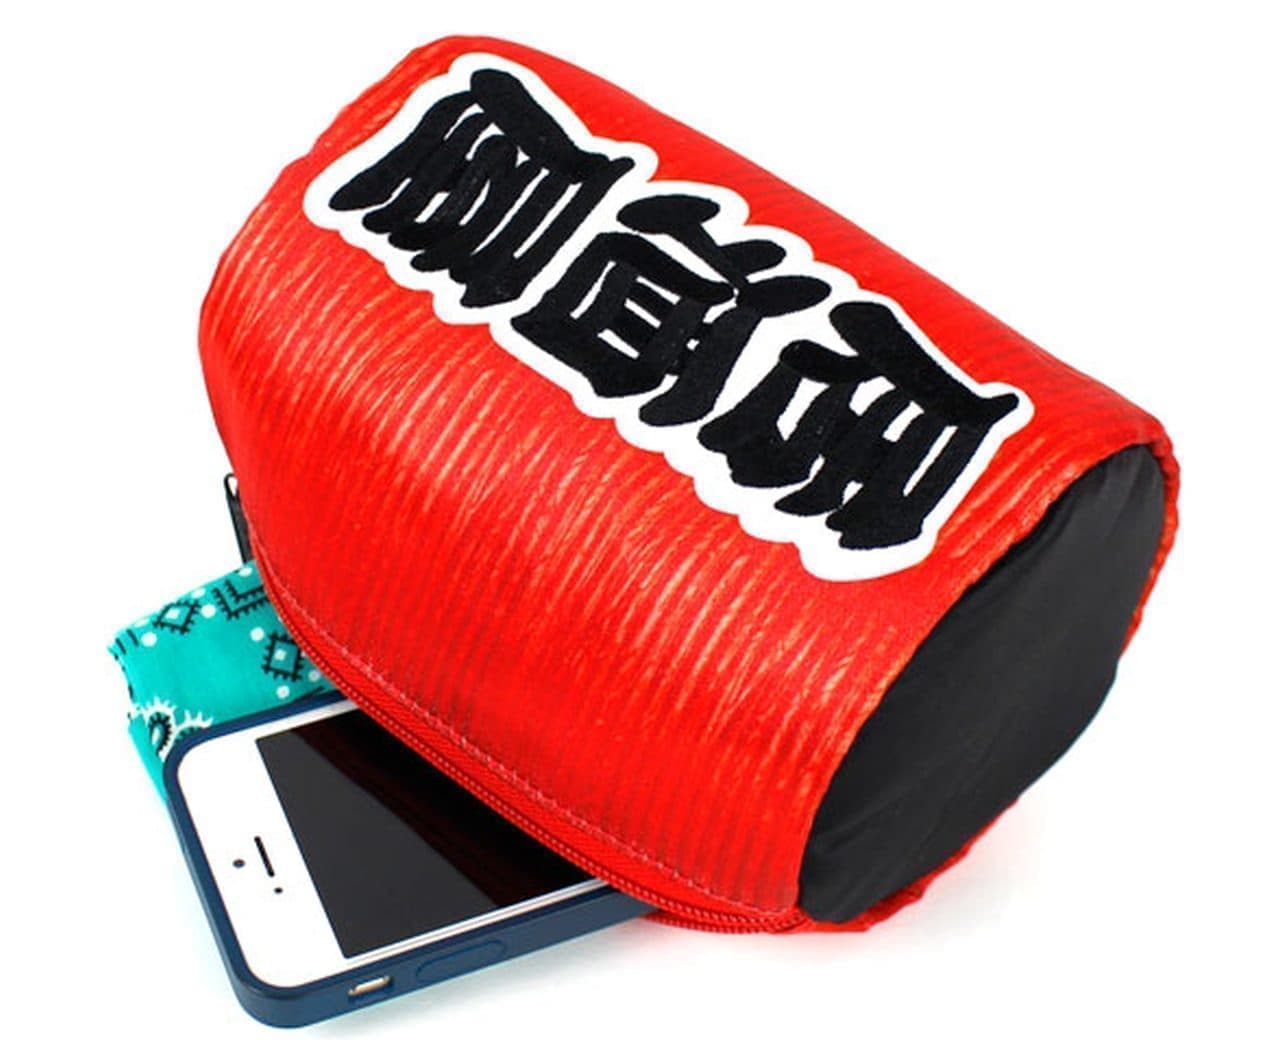 Village Vanguard Online "Chinese Pouch with Tote"